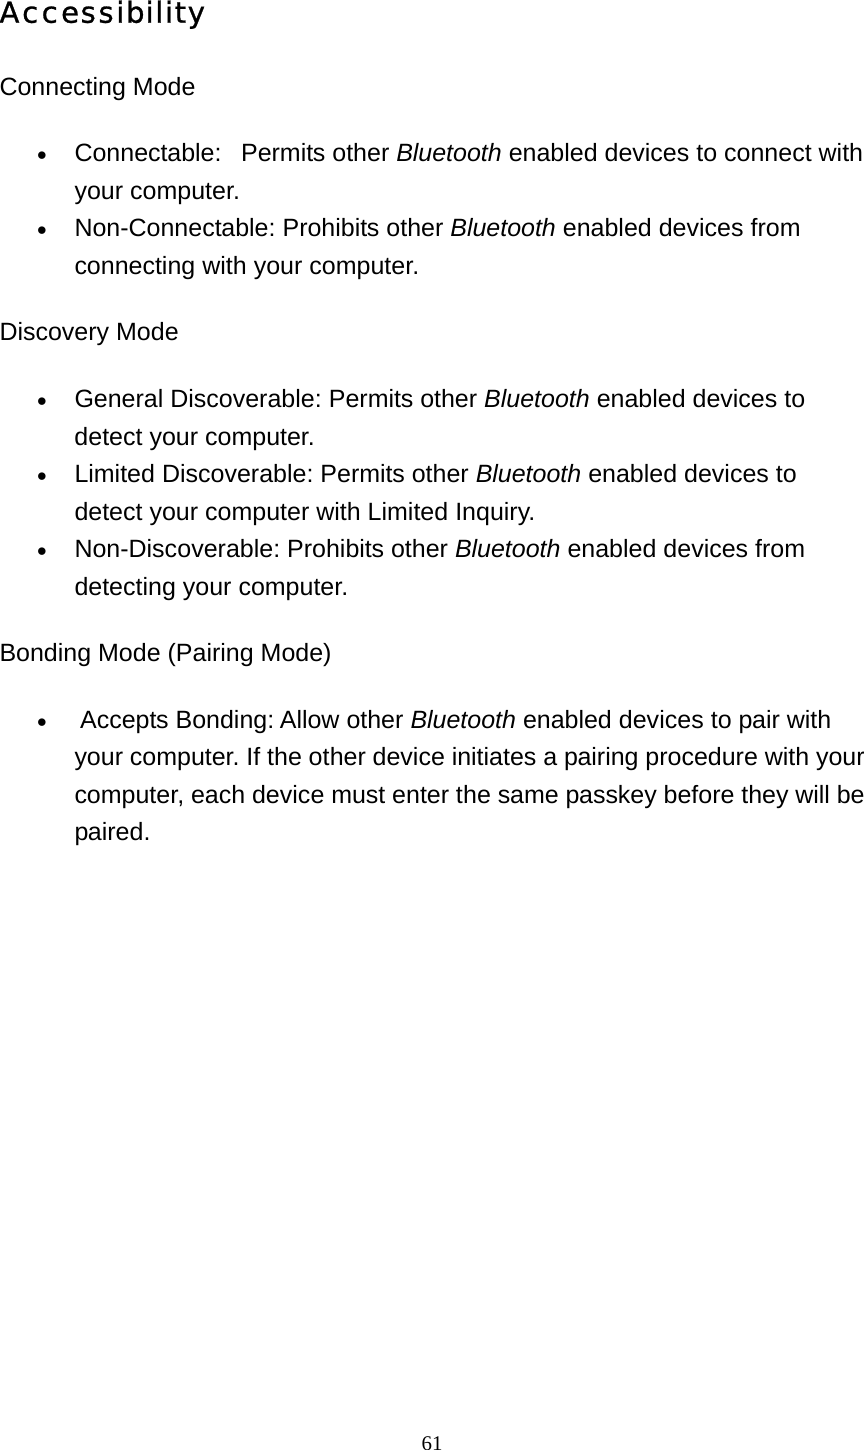   61Accessibility Connecting Mode   • Connectable:   Permits other Bluetooth enabled devices to connect with your computer.   • Non-Connectable: Prohibits other Bluetooth enabled devices from connecting with your computer.   Discovery Mode • General Discoverable: Permits other Bluetooth enabled devices to detect your computer.   • Limited Discoverable: Permits other Bluetooth enabled devices to detect your computer with Limited Inquiry.   • Non-Discoverable: Prohibits other Bluetooth enabled devices from detecting your computer.   Bonding Mode (Pairing Mode) •  Accepts Bonding: Allow other Bluetooth enabled devices to pair with your computer. If the other device initiates a pairing procedure with your computer, each device must enter the same passkey before they will be paired.  